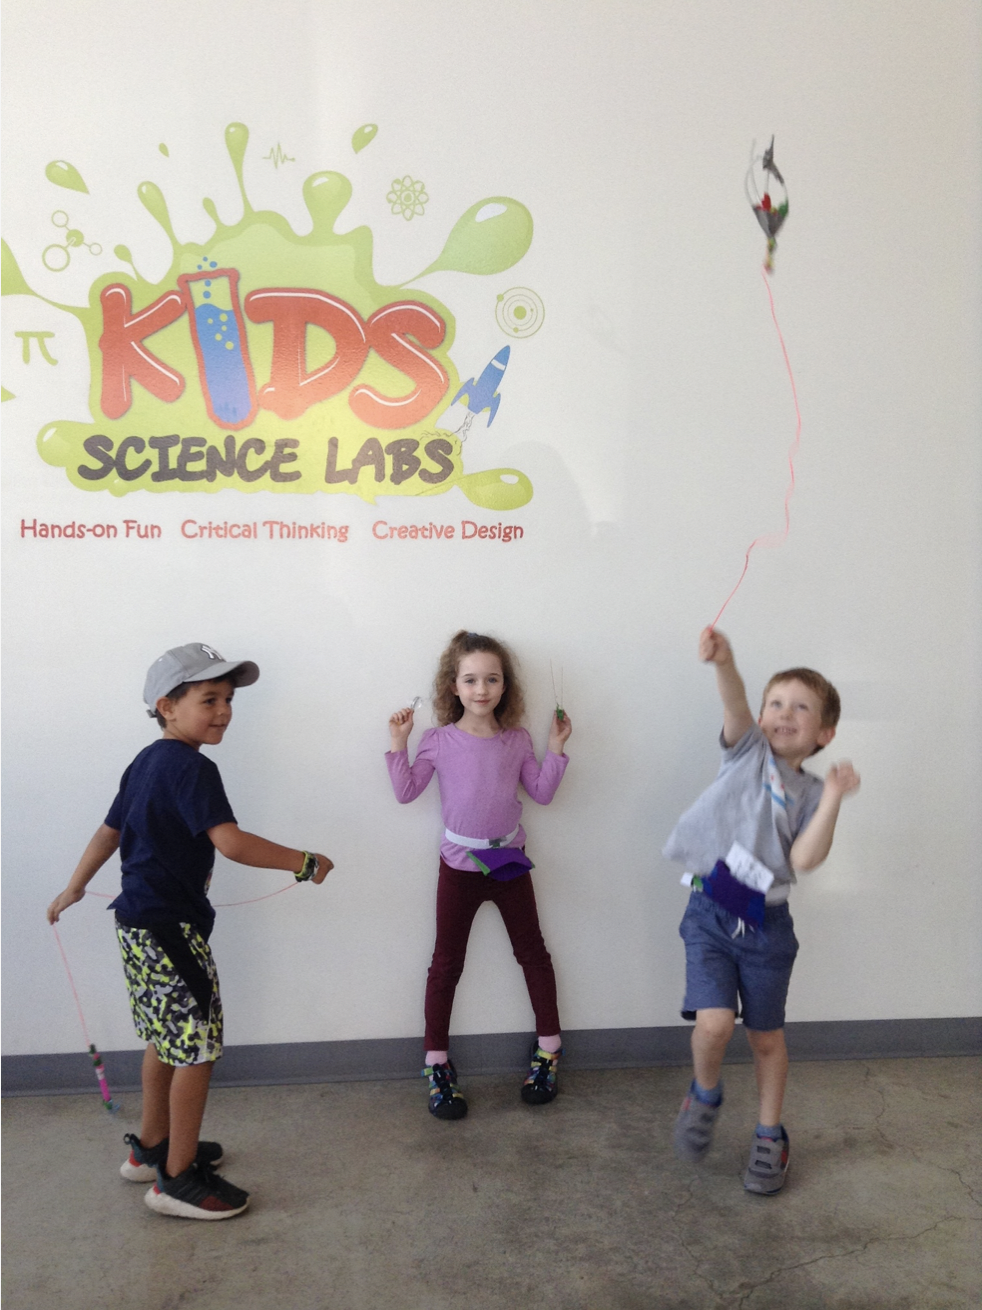 Spies vs. Jedis returns to innovate Gadgets 8/1 — Kids Science Labs